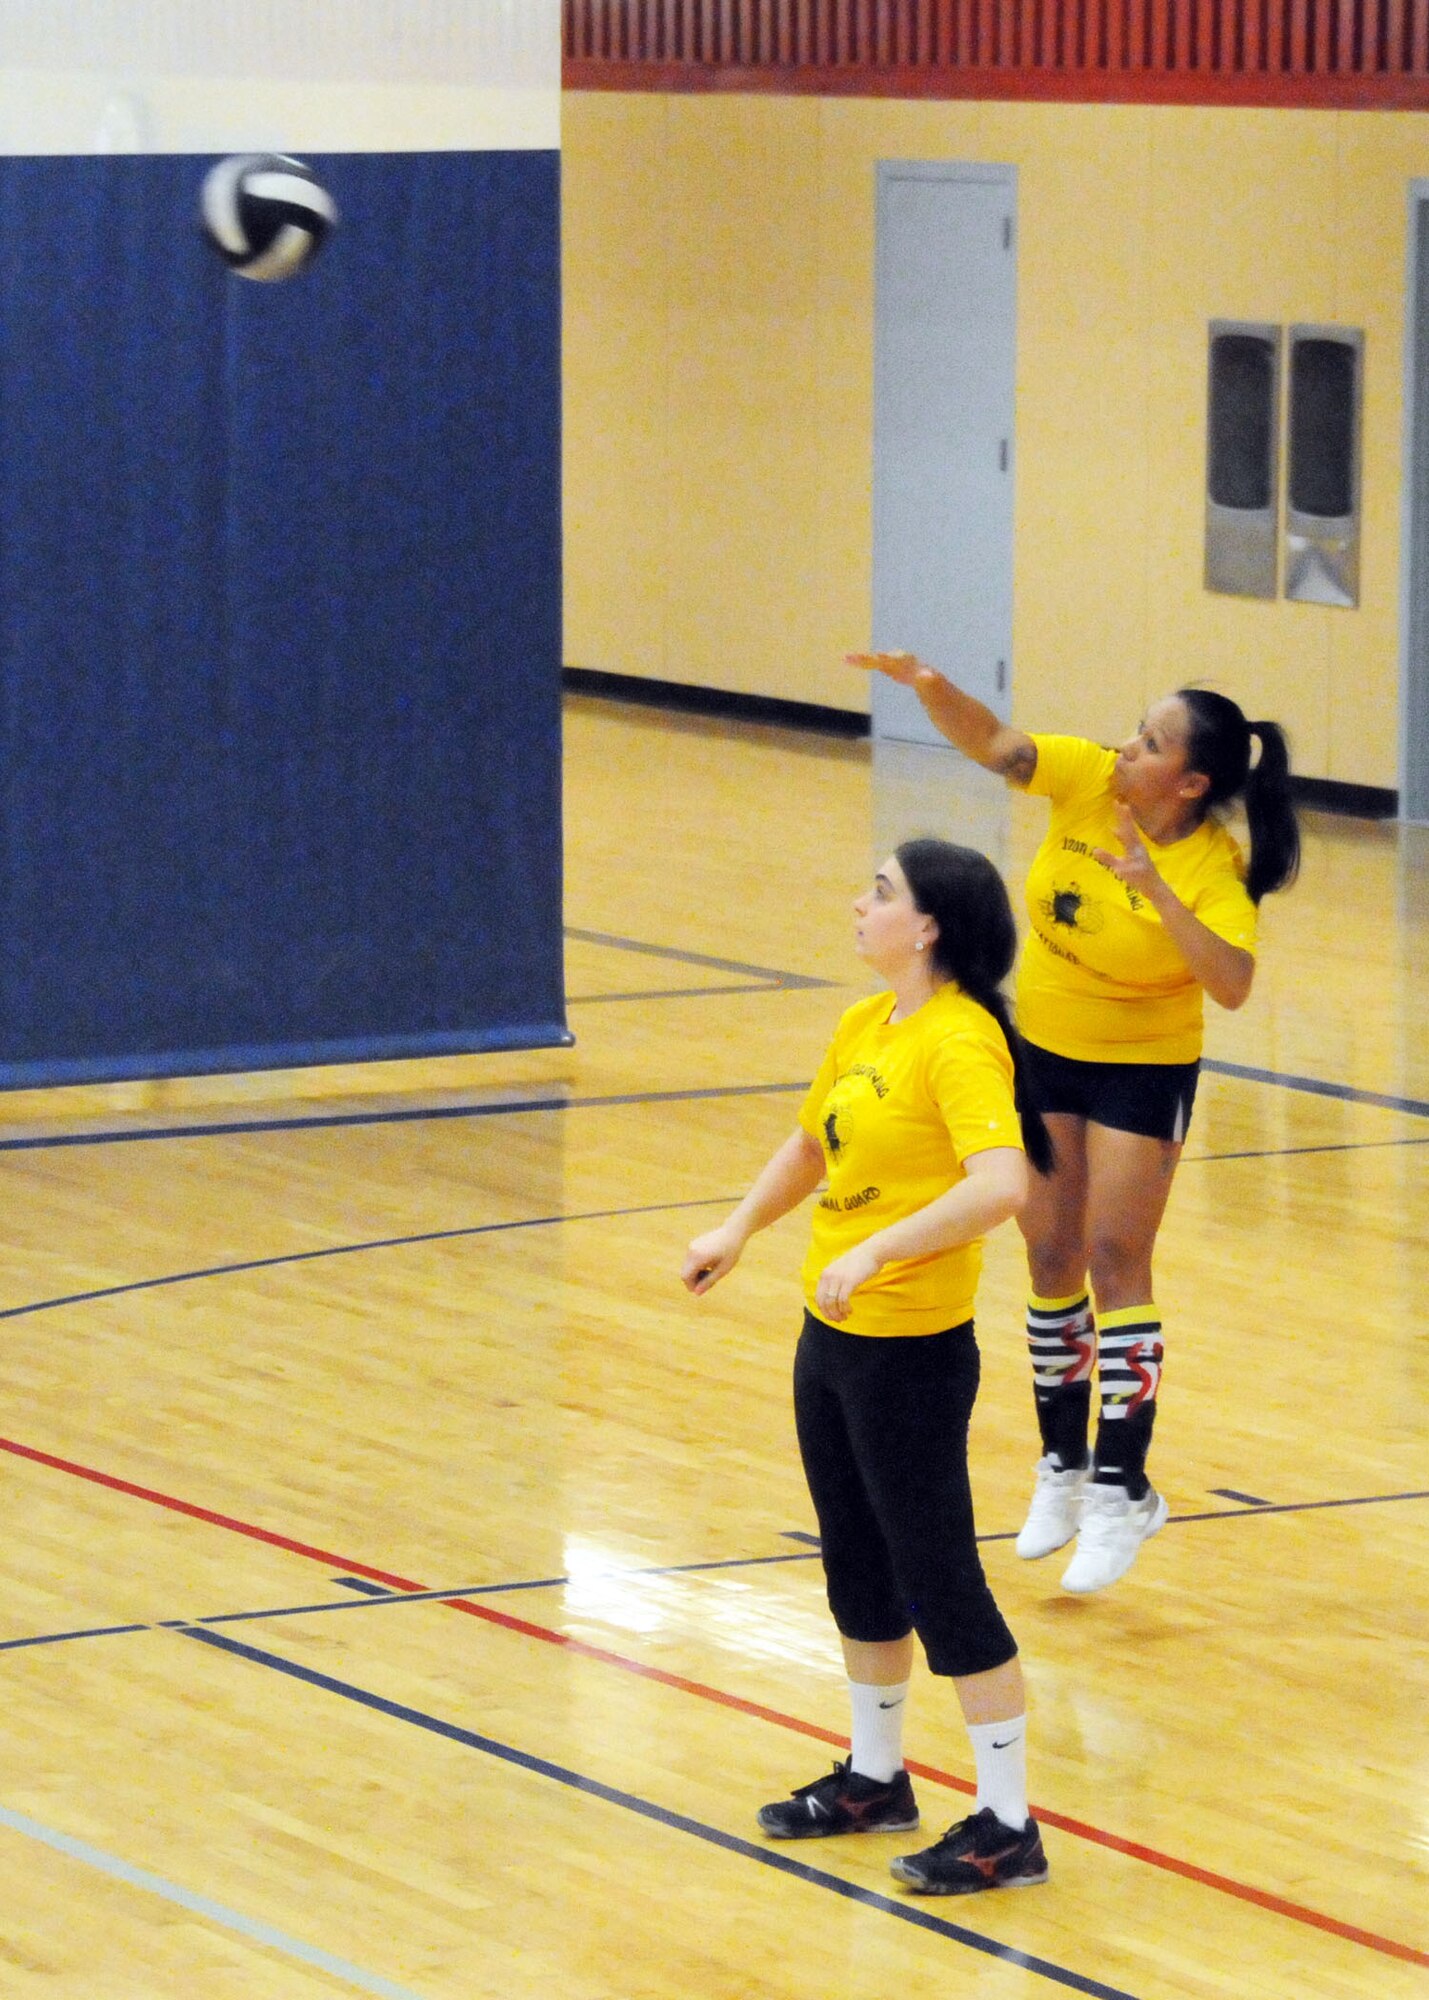 Tech. Sgt. Rhoda Bargas serves the volleyball to the opposing team during the final Montana Air National Guard Vigilantes volleyball game played during the season playoffs held at the Malmstrom Fitness Center on May 14, 2013.  (U.S. Air Force photo/Senior Master Sgt. Eric Peterson)